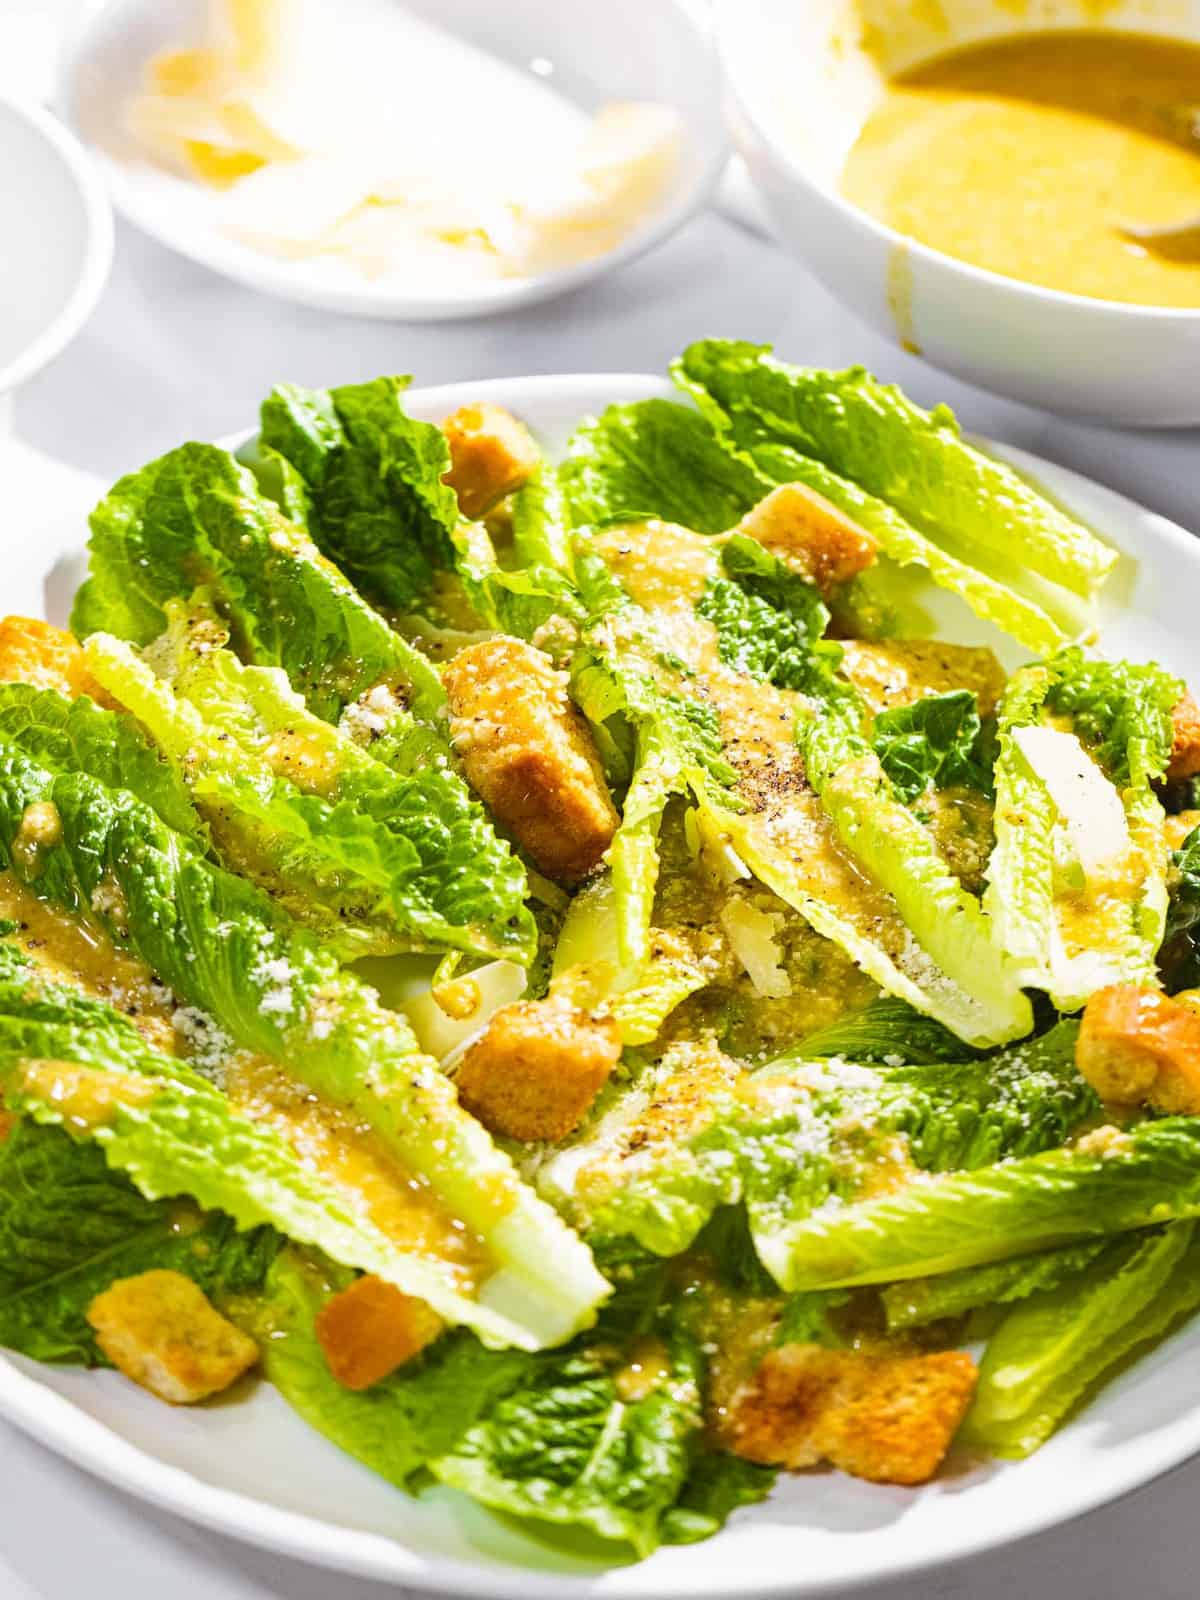 Caesar salad with dressing, romaine lettuce, and croutons.